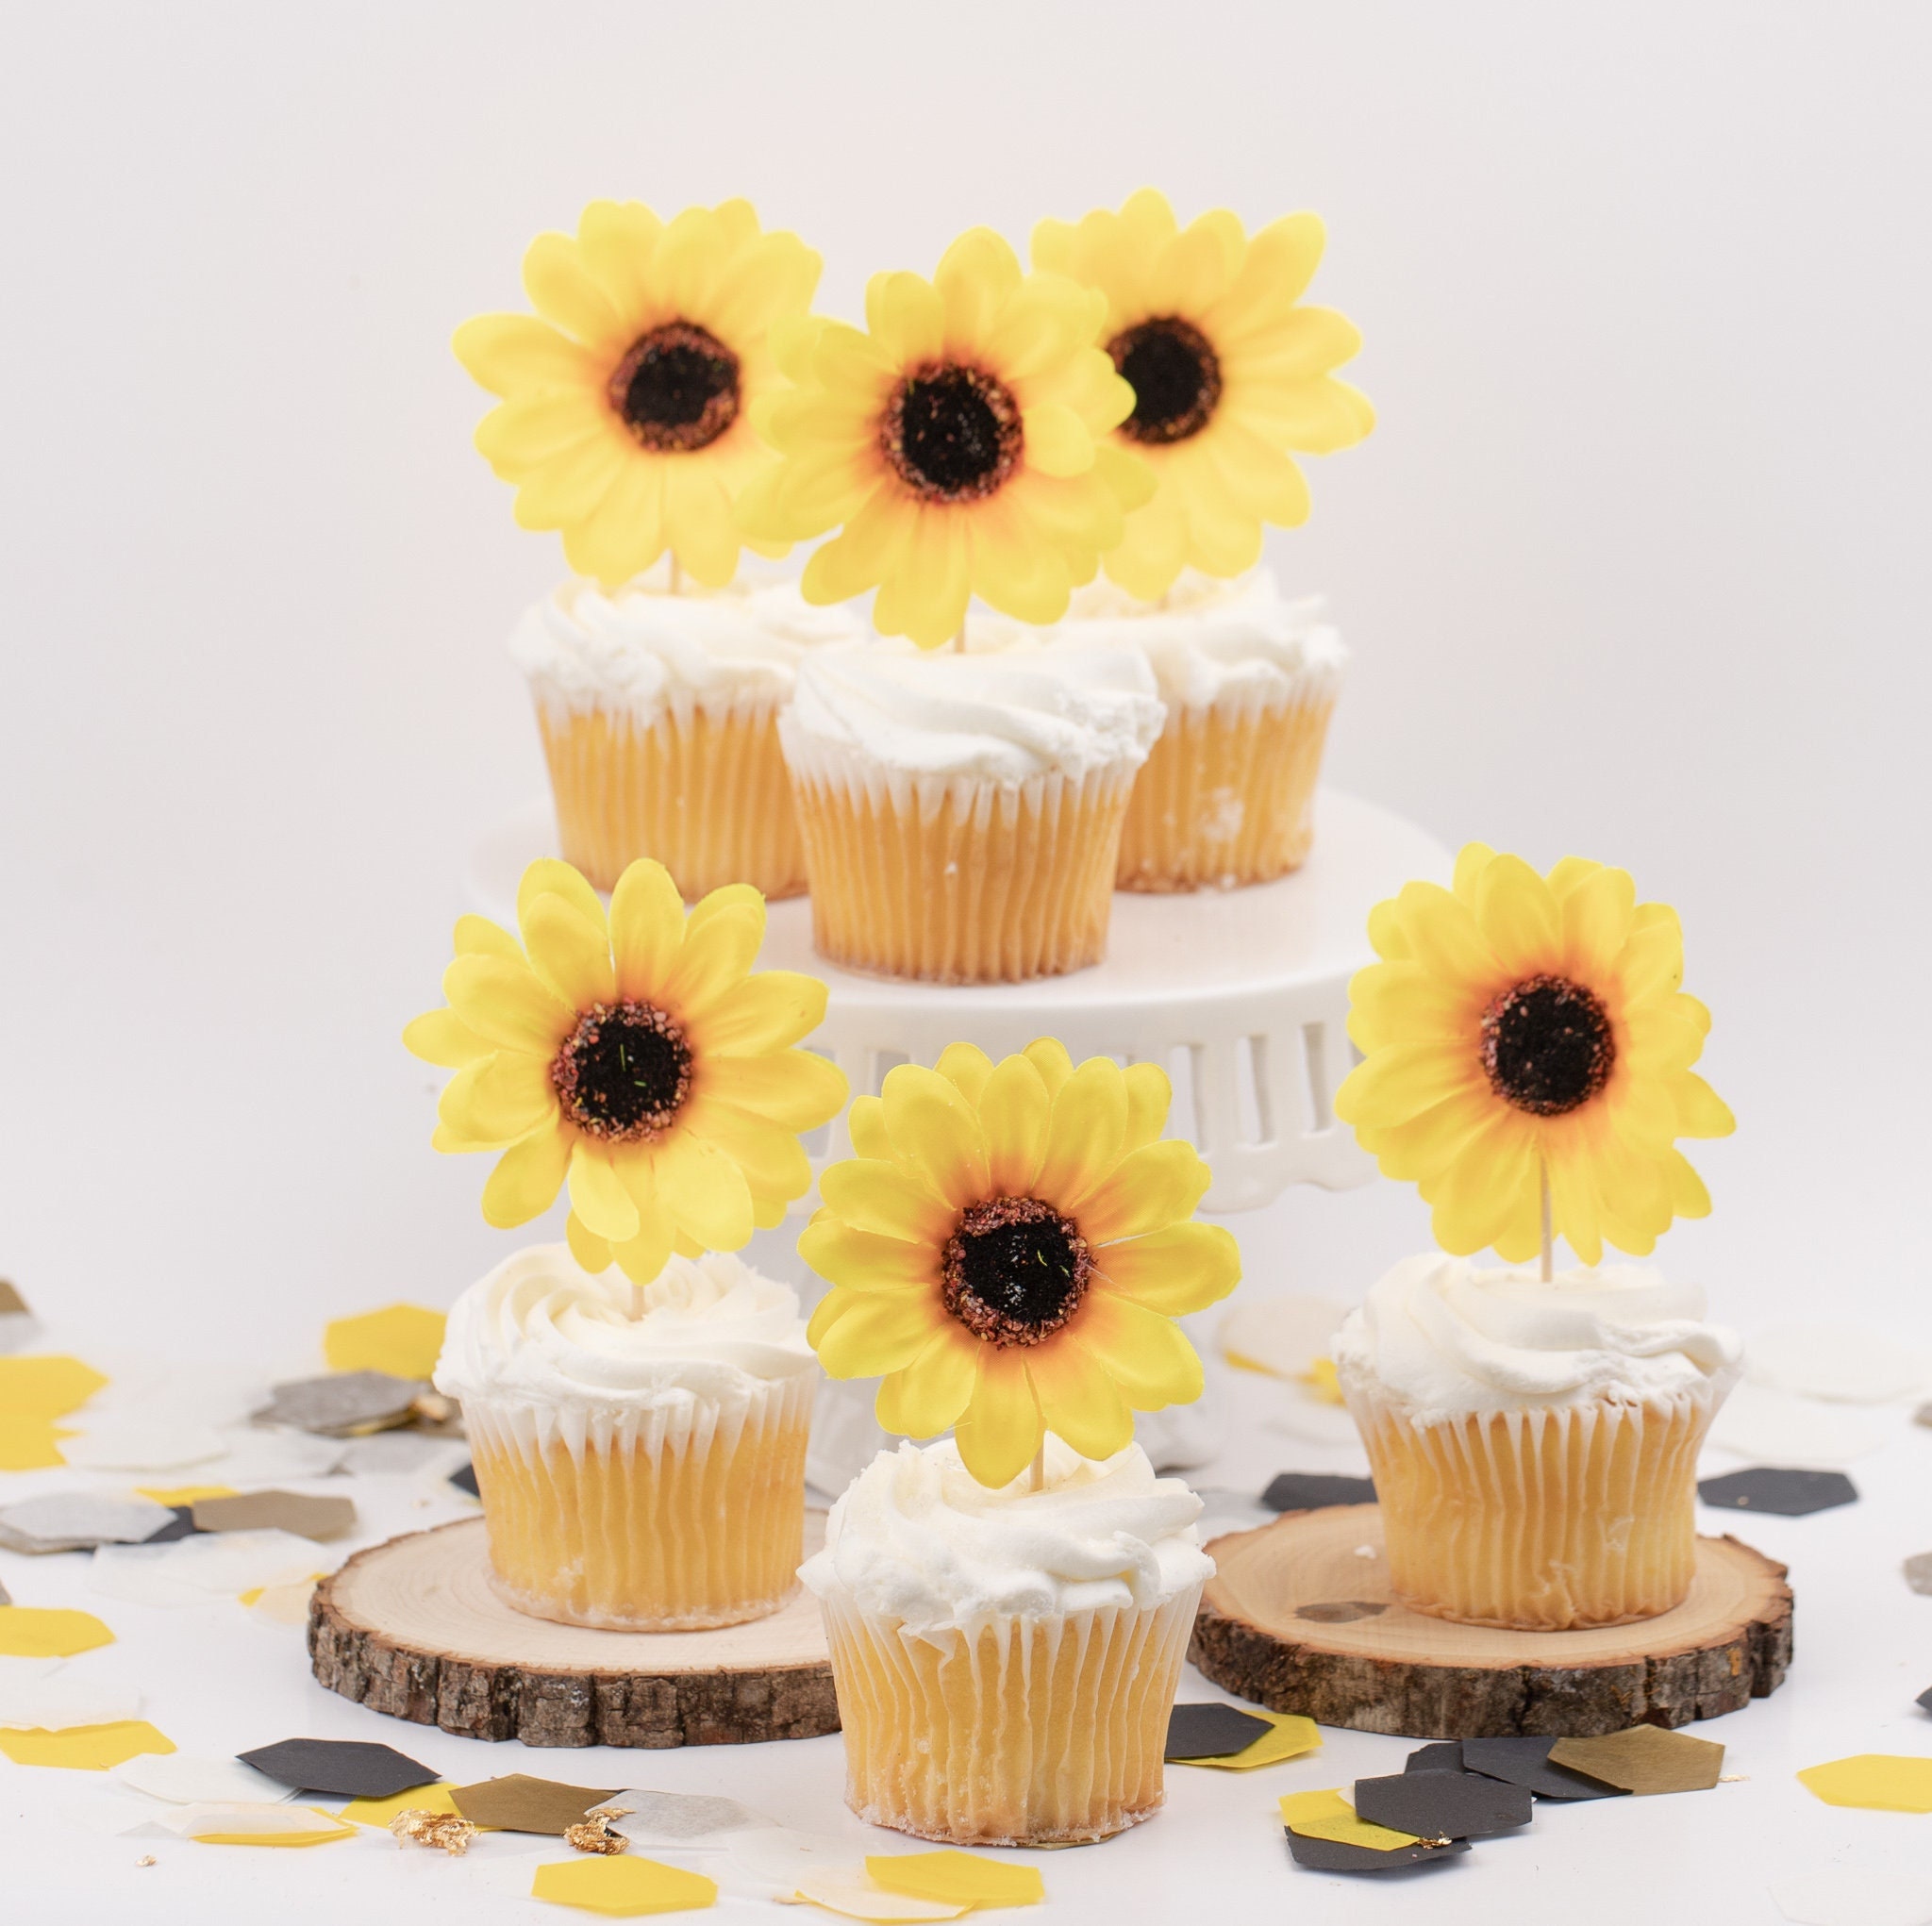 CHOCKACAKE Edible Flowers for Cake Decorating Topper Sunflowers for  Cupcakes Drinks Decorations (28pcs)